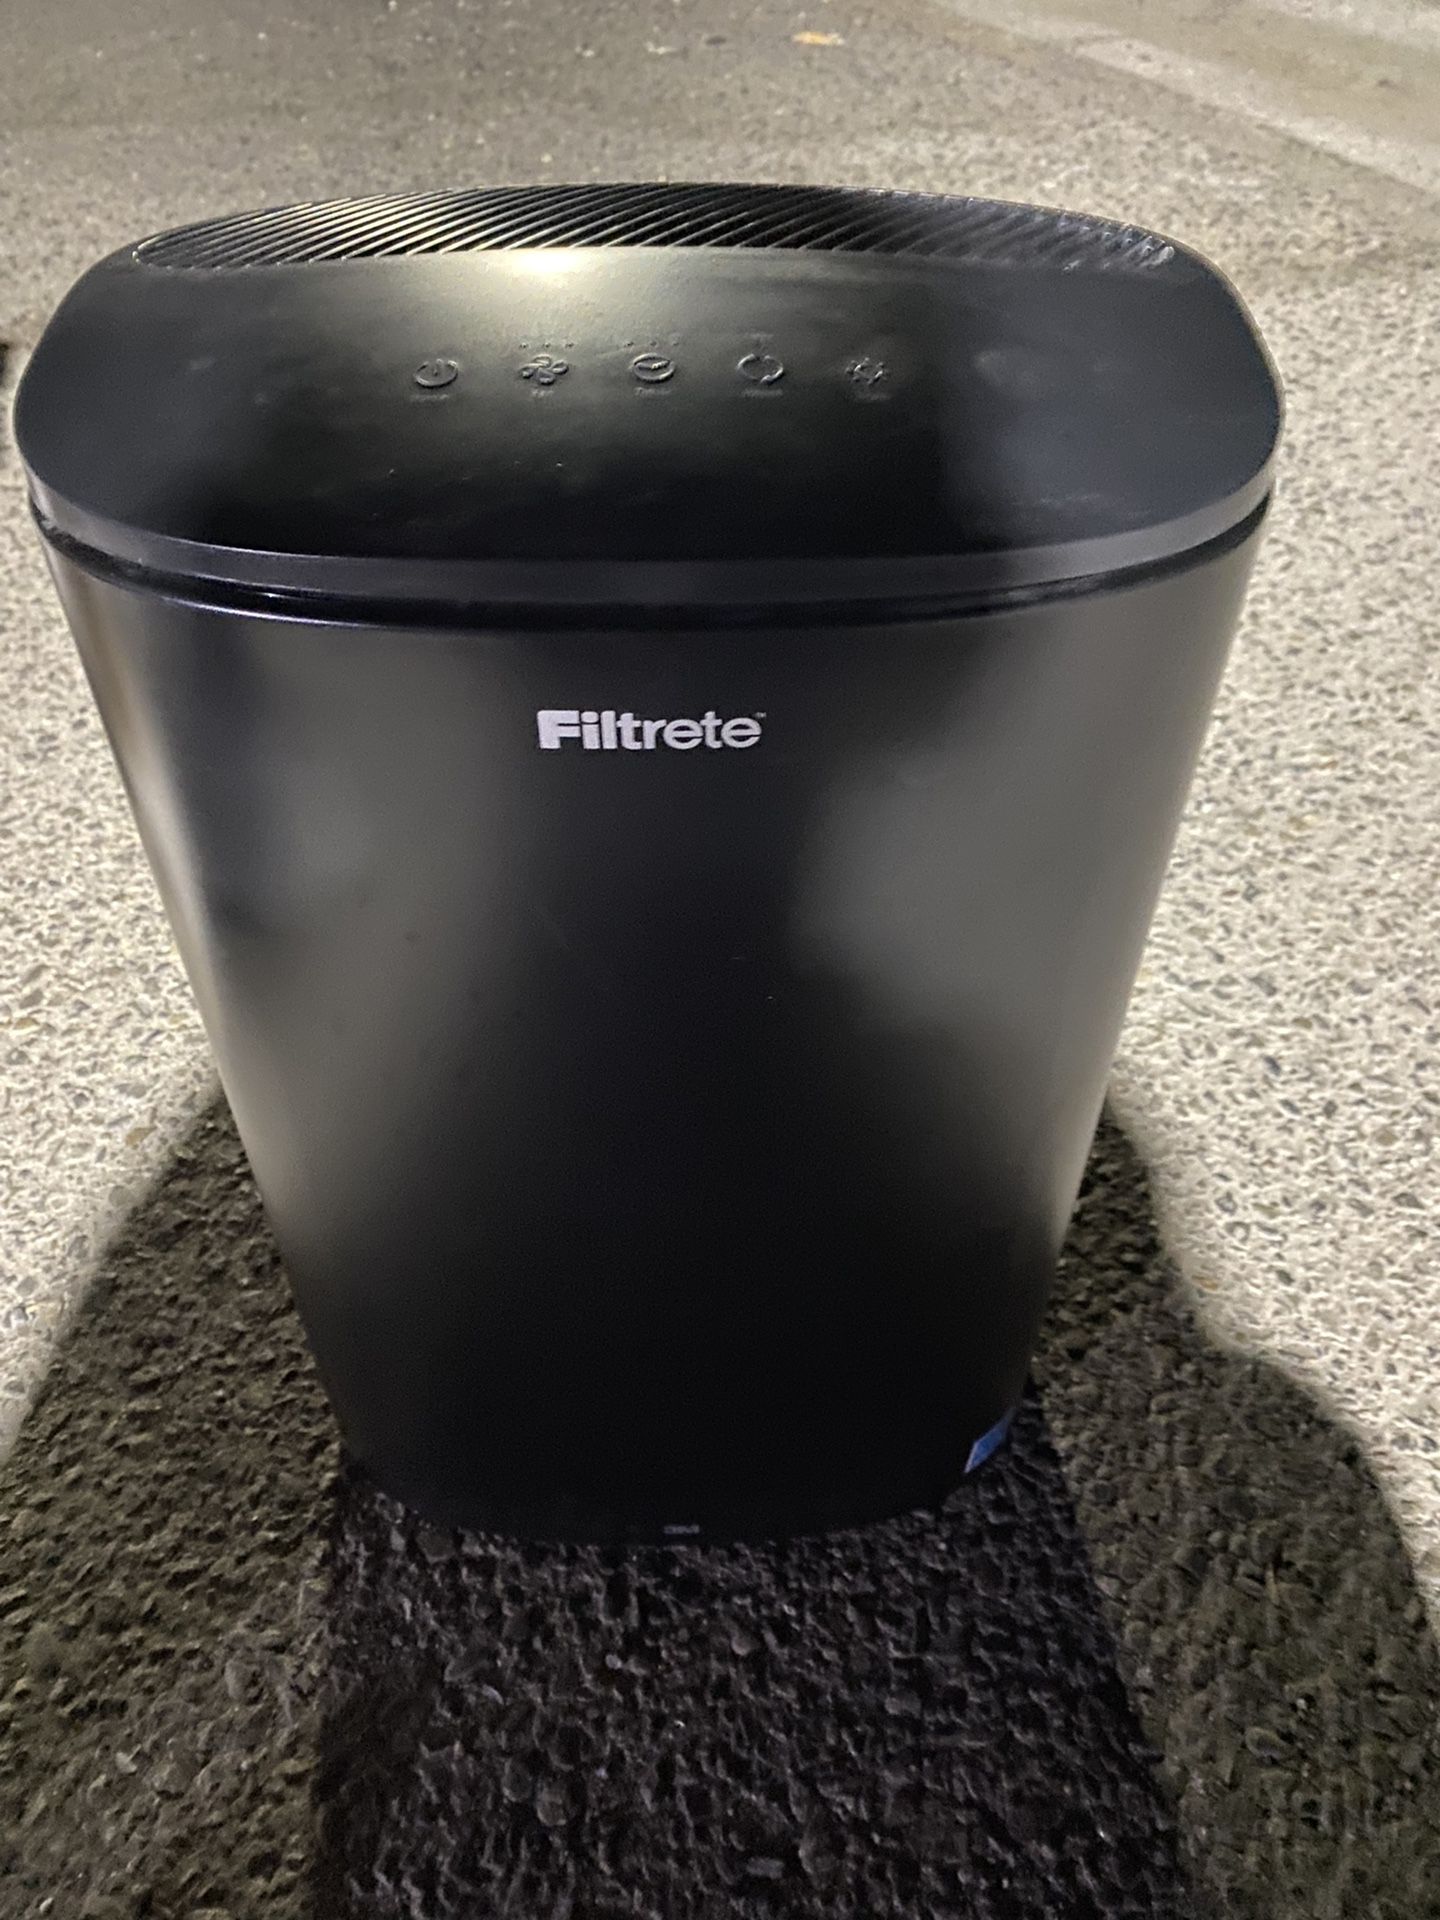 Filtrate Air Purification System